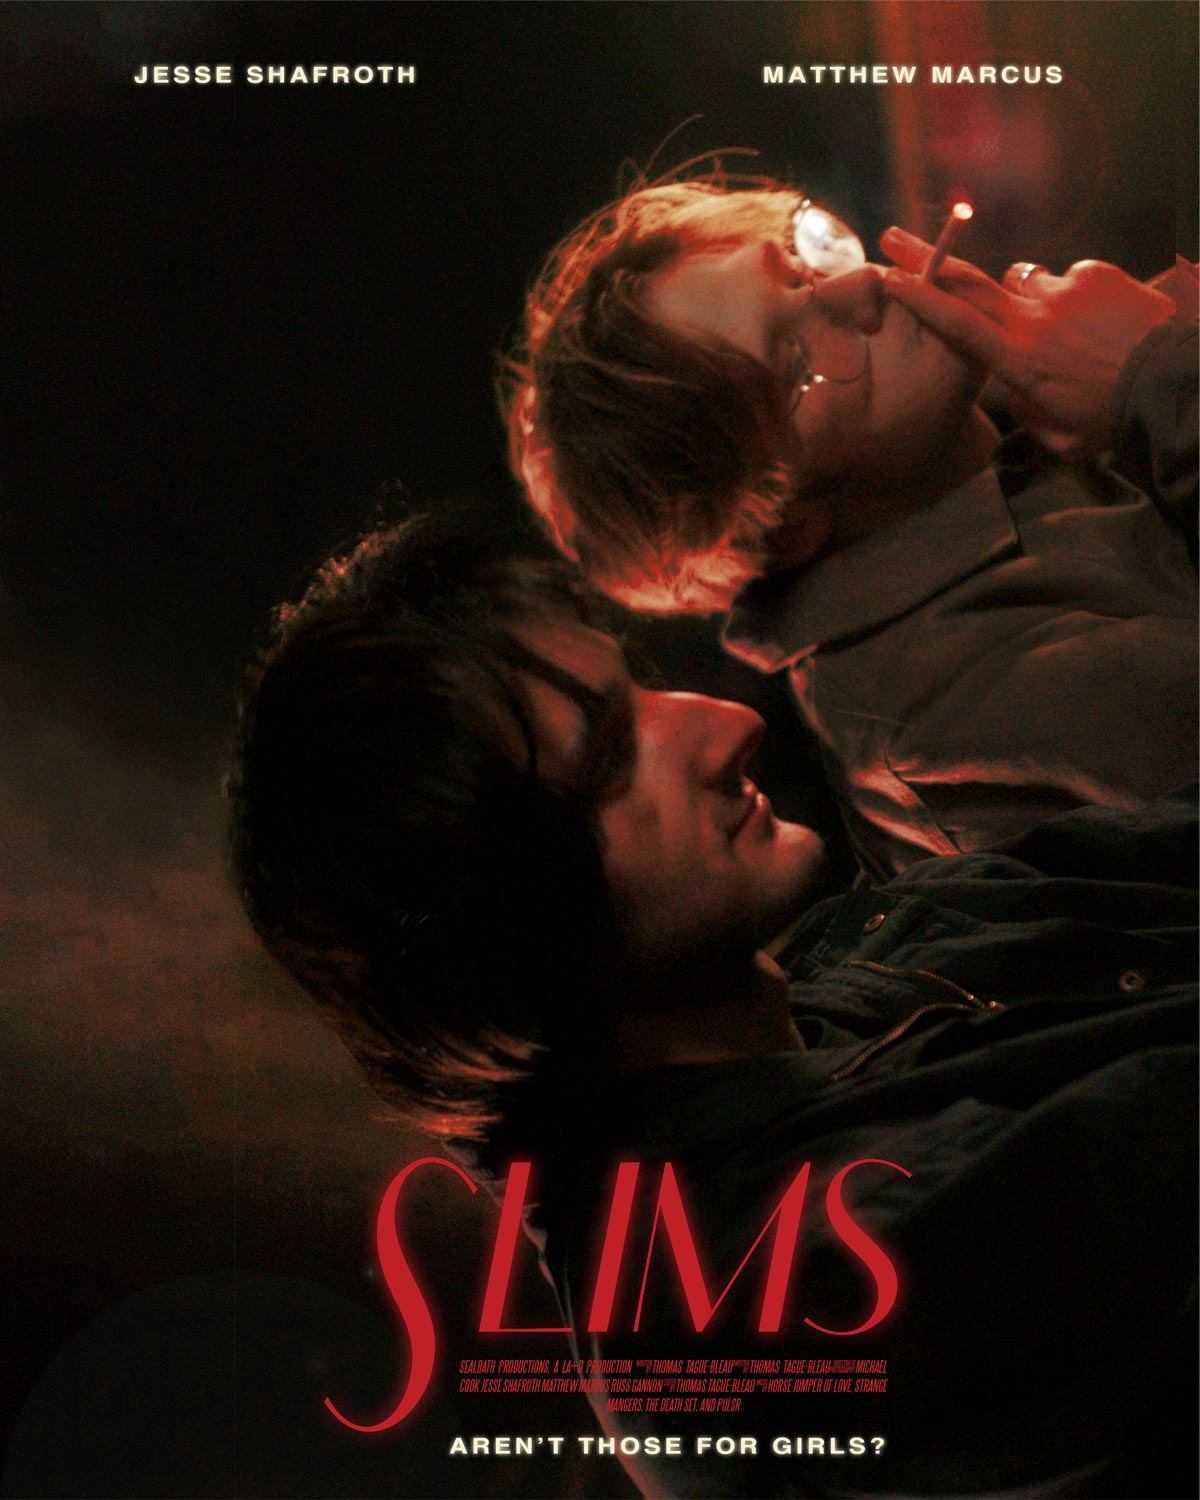 Movie poster for Slims - two young men smoking at night